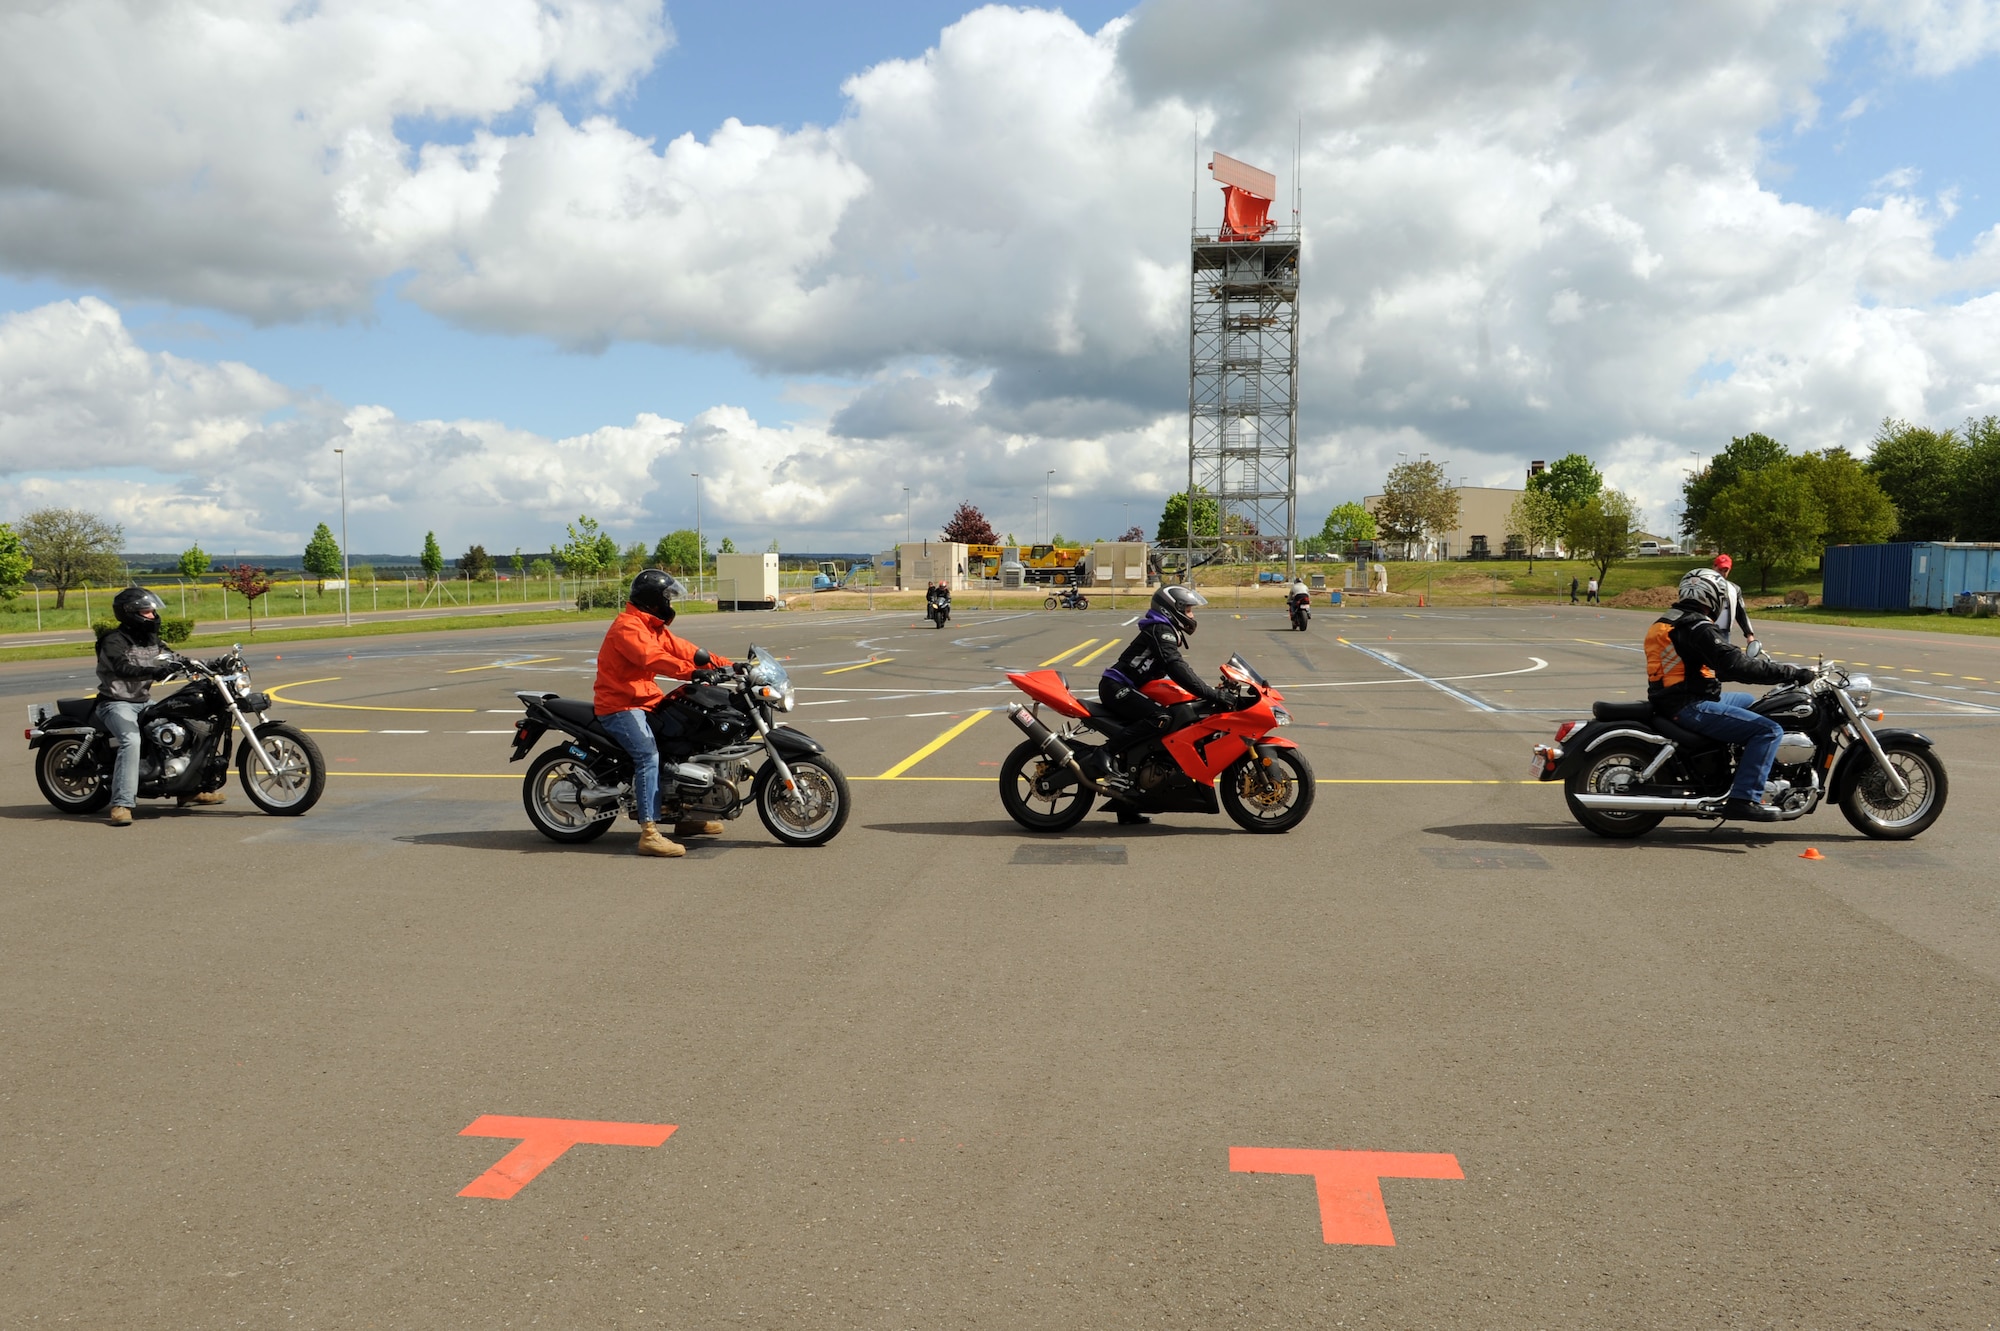 SPANGDAHLEM AIR BASE, Germany – Motorcycle riders execute maneuvers during a motorcycle safety class at the Saber driving course here May 15. The course participants practiced maneuvers to include path of travel, quick stops and obstacle avoidance. The class is geared to improve riders’ skill by performing different maneuvers on the course as well as discussing and reviewing a variety of safety information. The 52nd Fighter Wing Safety office conducts the motorcycle safety course three times monthly. U.S Air Forces in Europe regulations mandate that every motorcyclist on base must take or retake this class once every three years to keep their skillset current. (U.S. Air Force photo by Senior Airman Christopher Toon/Released)